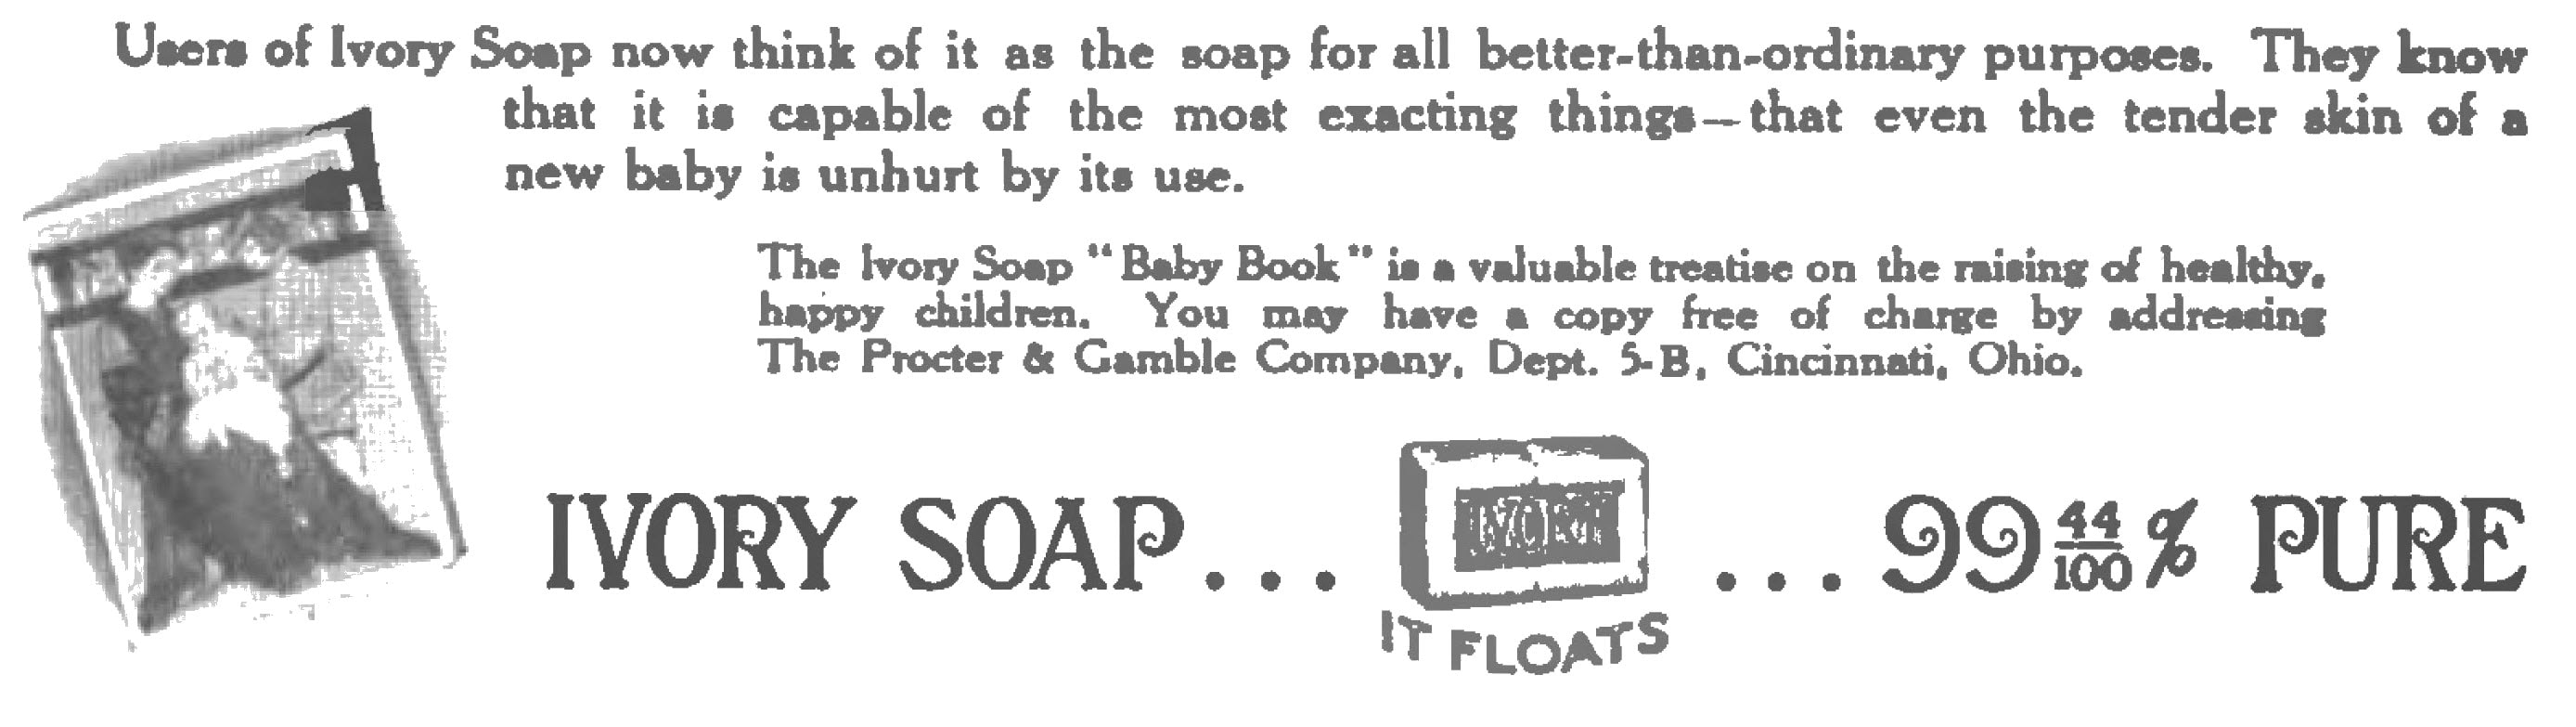 Advertisement for Ivory Soap, 